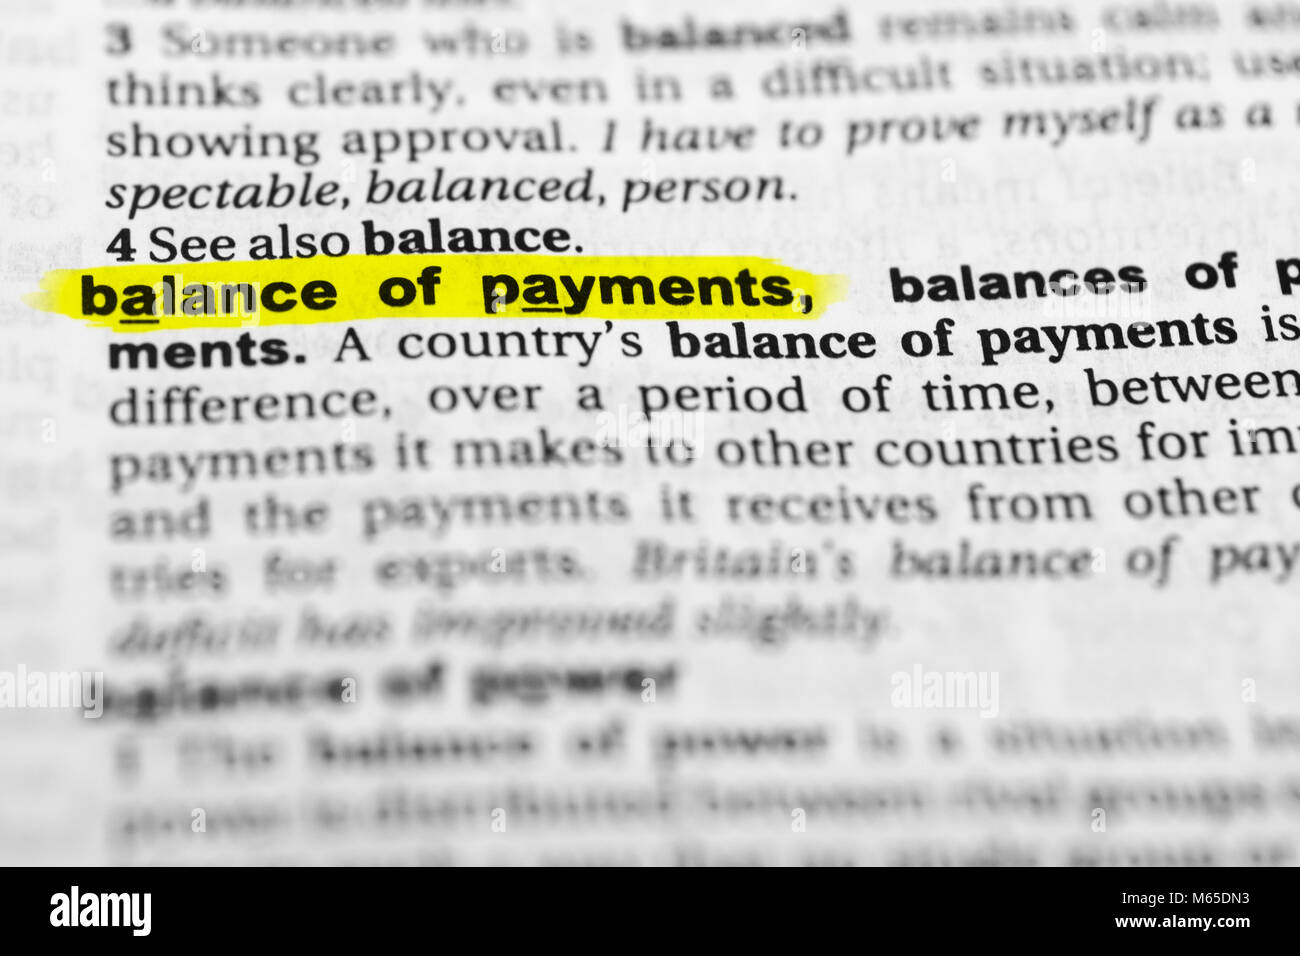 highlighted english word "balance of payments" and its definition in